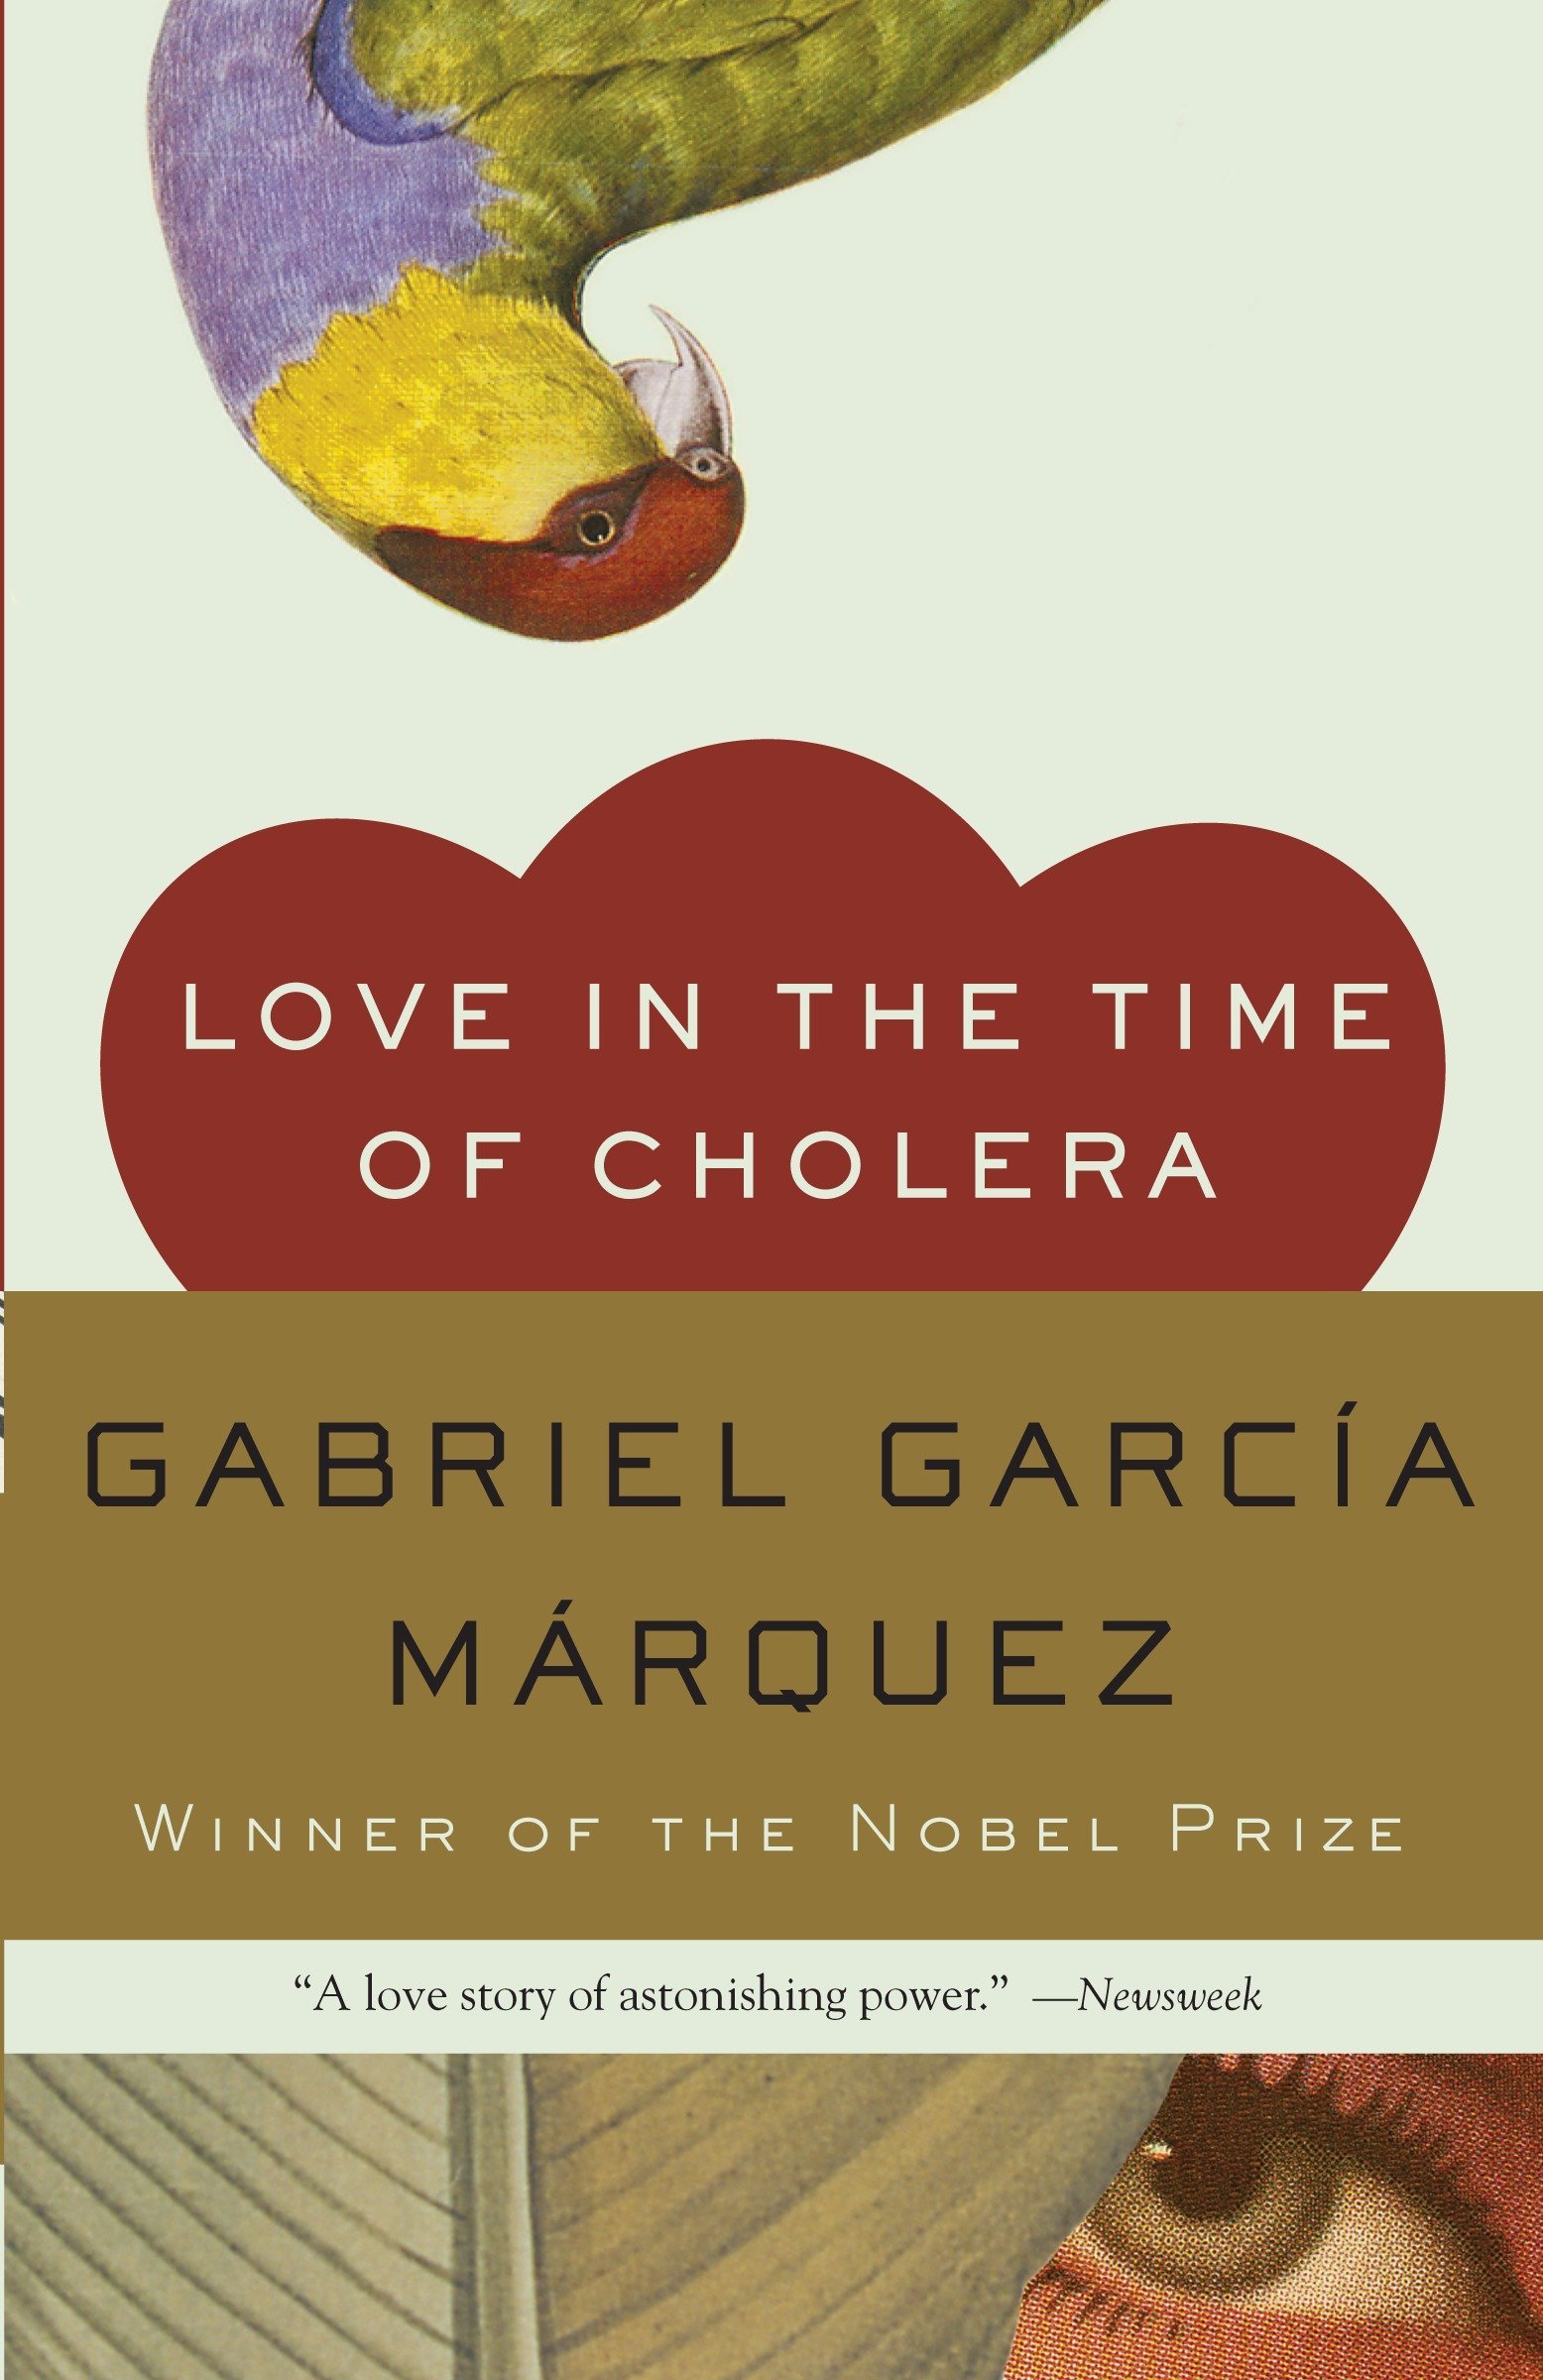 Love in a time of cholera